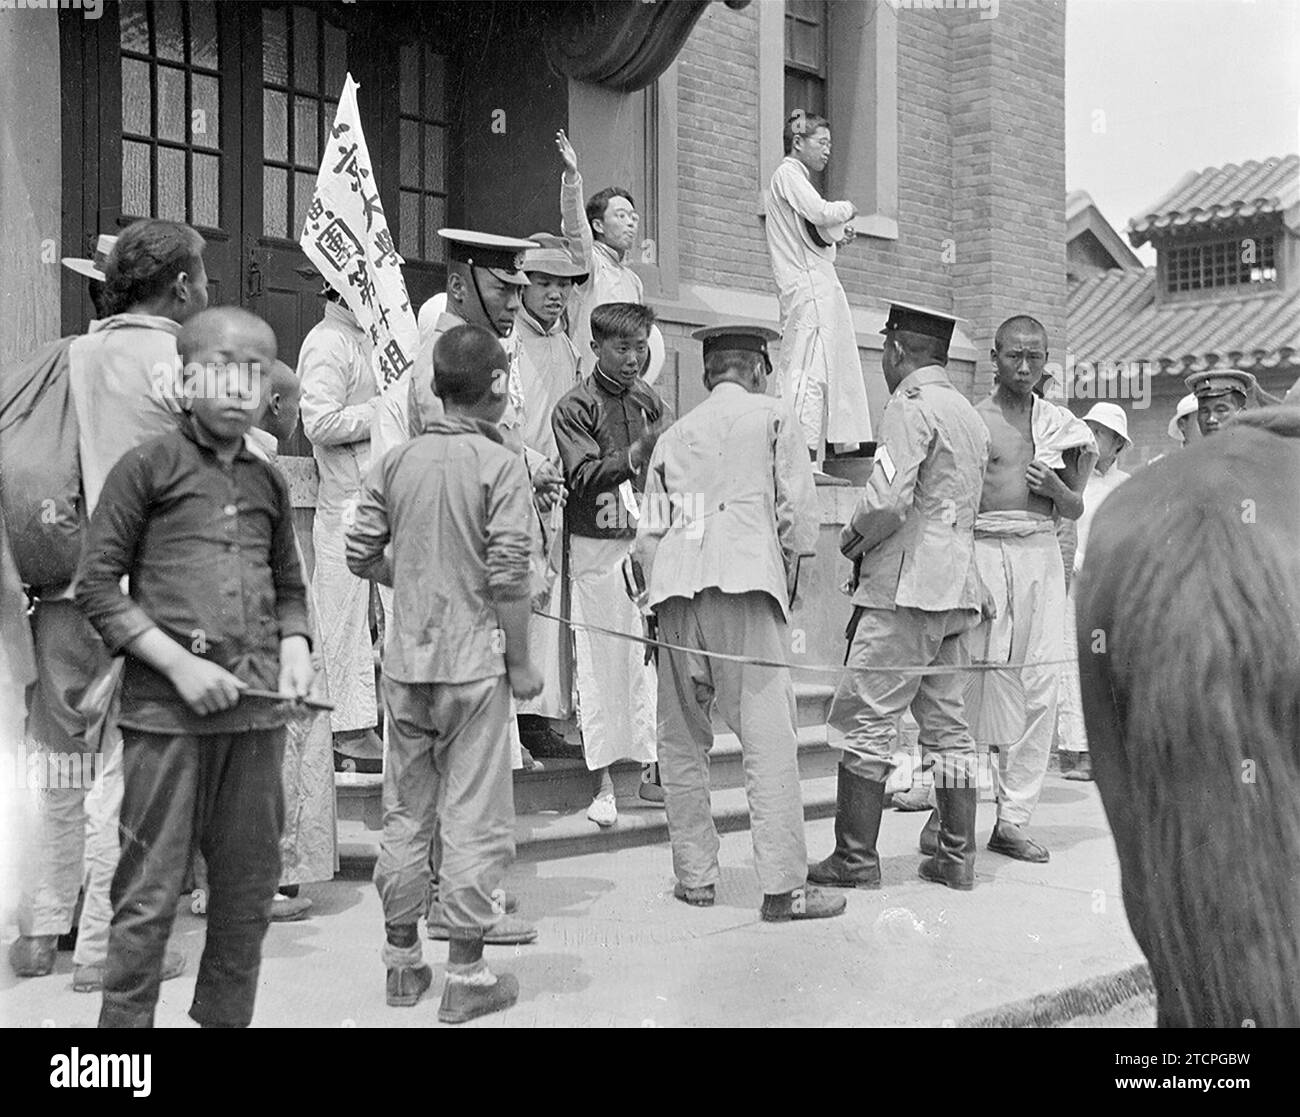 China: Revolutionary students and lecturers demonstrating at Beijing University, May 4th Movement, 1919.  The May Fourth Movement was an anti-imperialist, cultural and political movement growing out of student demonstrations in Beijing on May 4, 1919, protesting the Chinese government's weak response to the Treaty of Versailles, especially the Shandong Problem. These demonstrations sparked national protests and marked the upsurge of Chinese nationalism, a shift towards political mobilisation and away from cultural activities, and a move towards a populist base rather than intellectual elites. Stock Photo